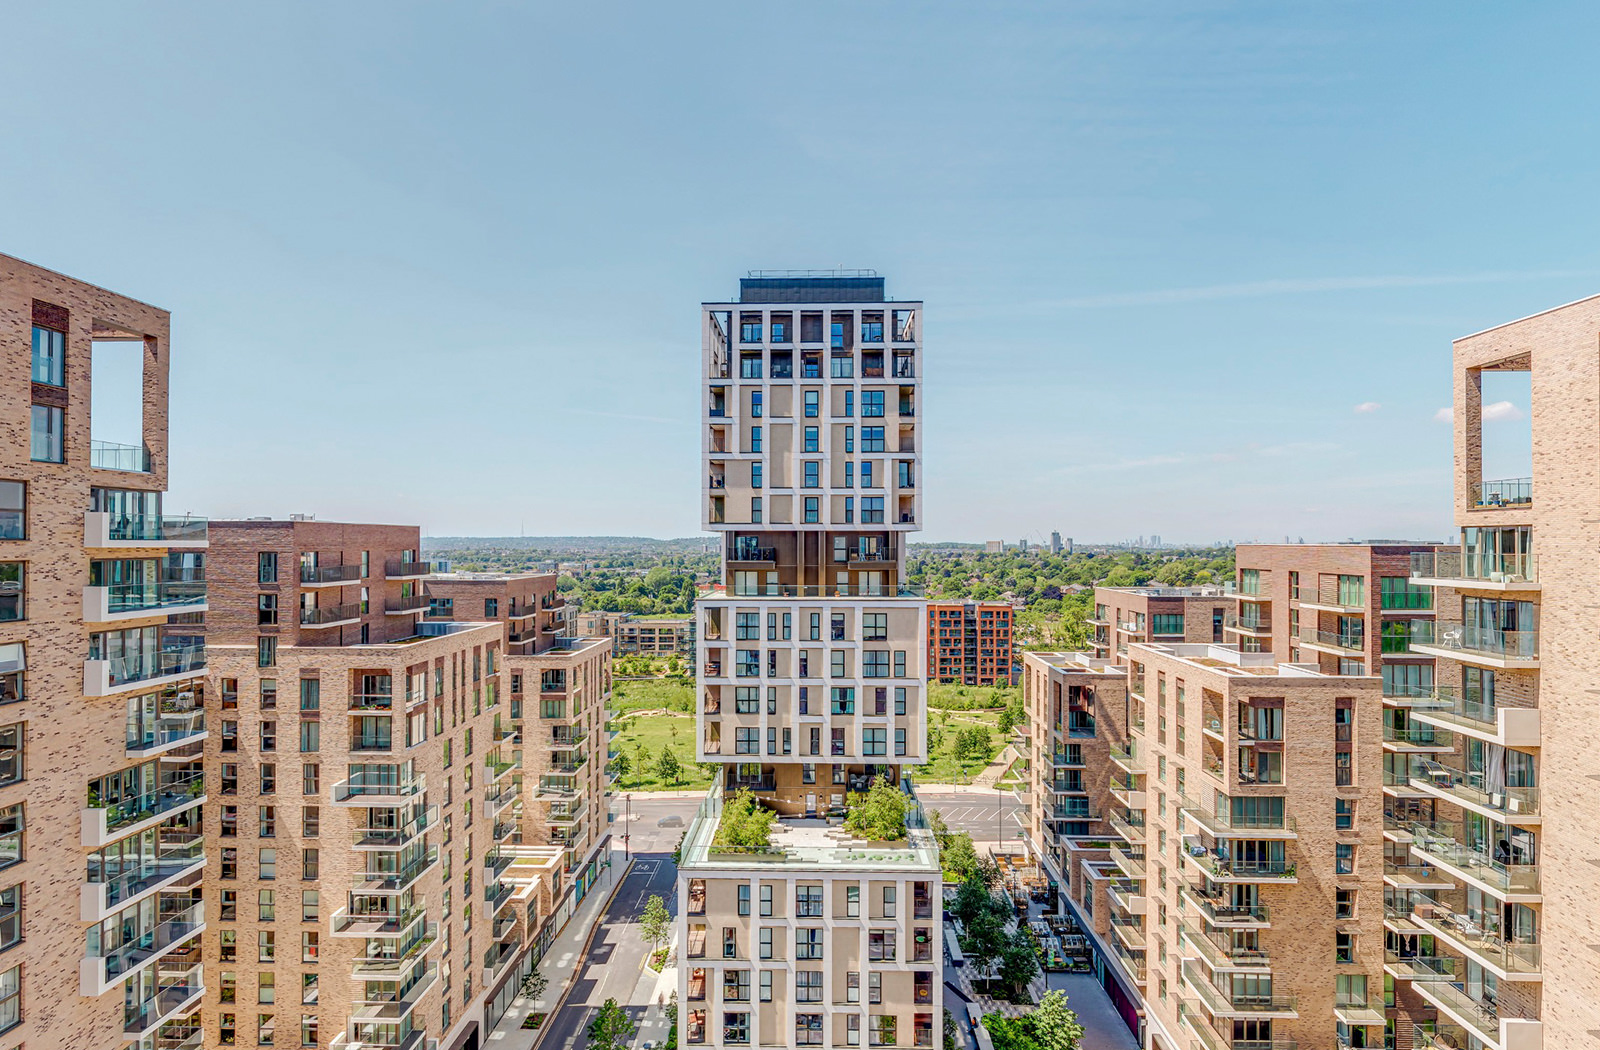 Kidbrooke Village Virtual tour - still image taken from a drone 360 showing the buildings and skyline views at KV